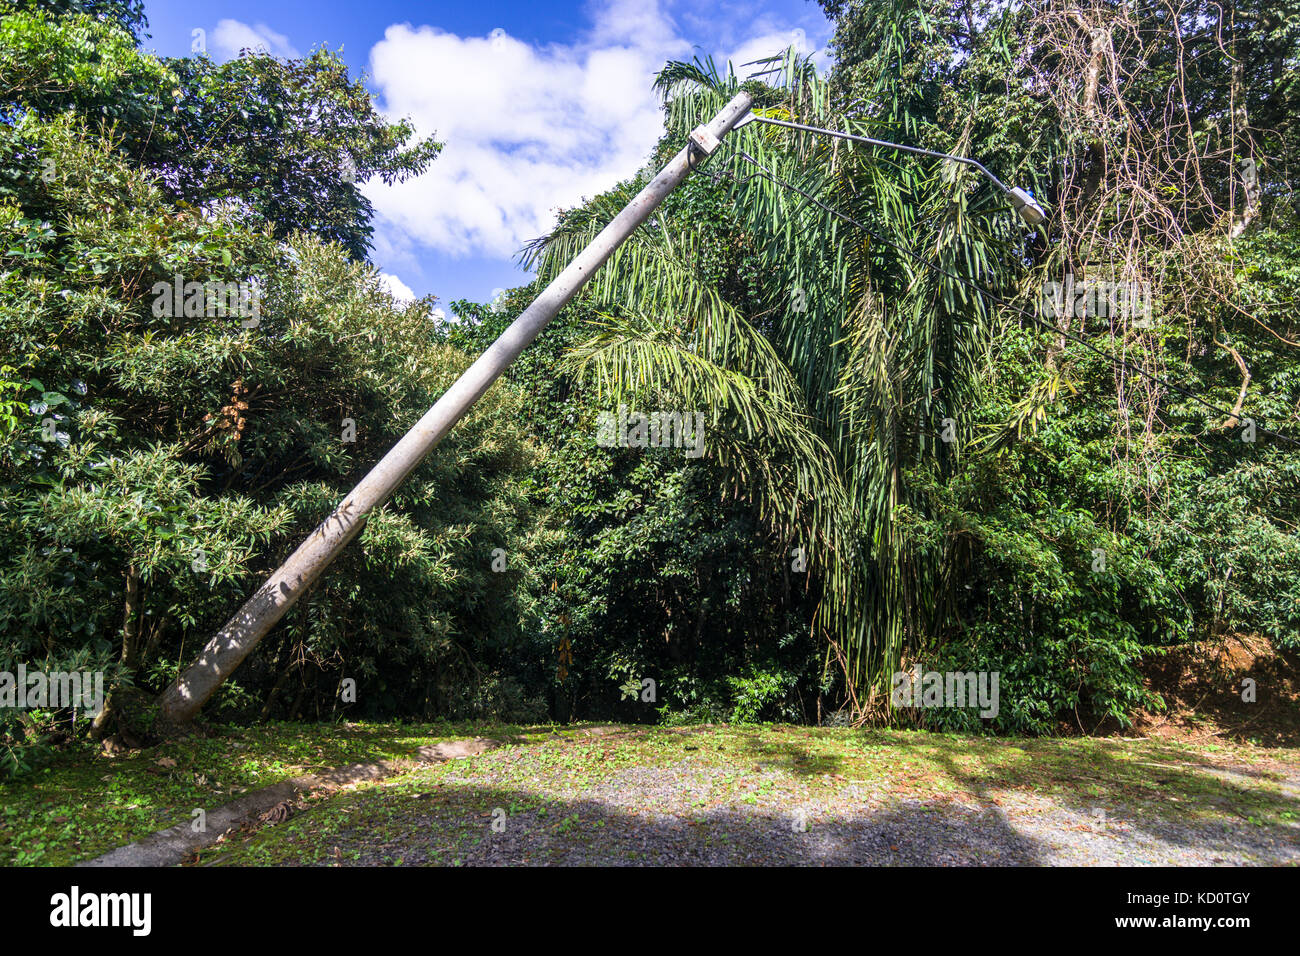 Trees and electric power lines down after strong tropical storm force damaging winds near El Valle de Anton, Panama. Credit: Urs Hauenstein/Alamy Live News Stock Photo